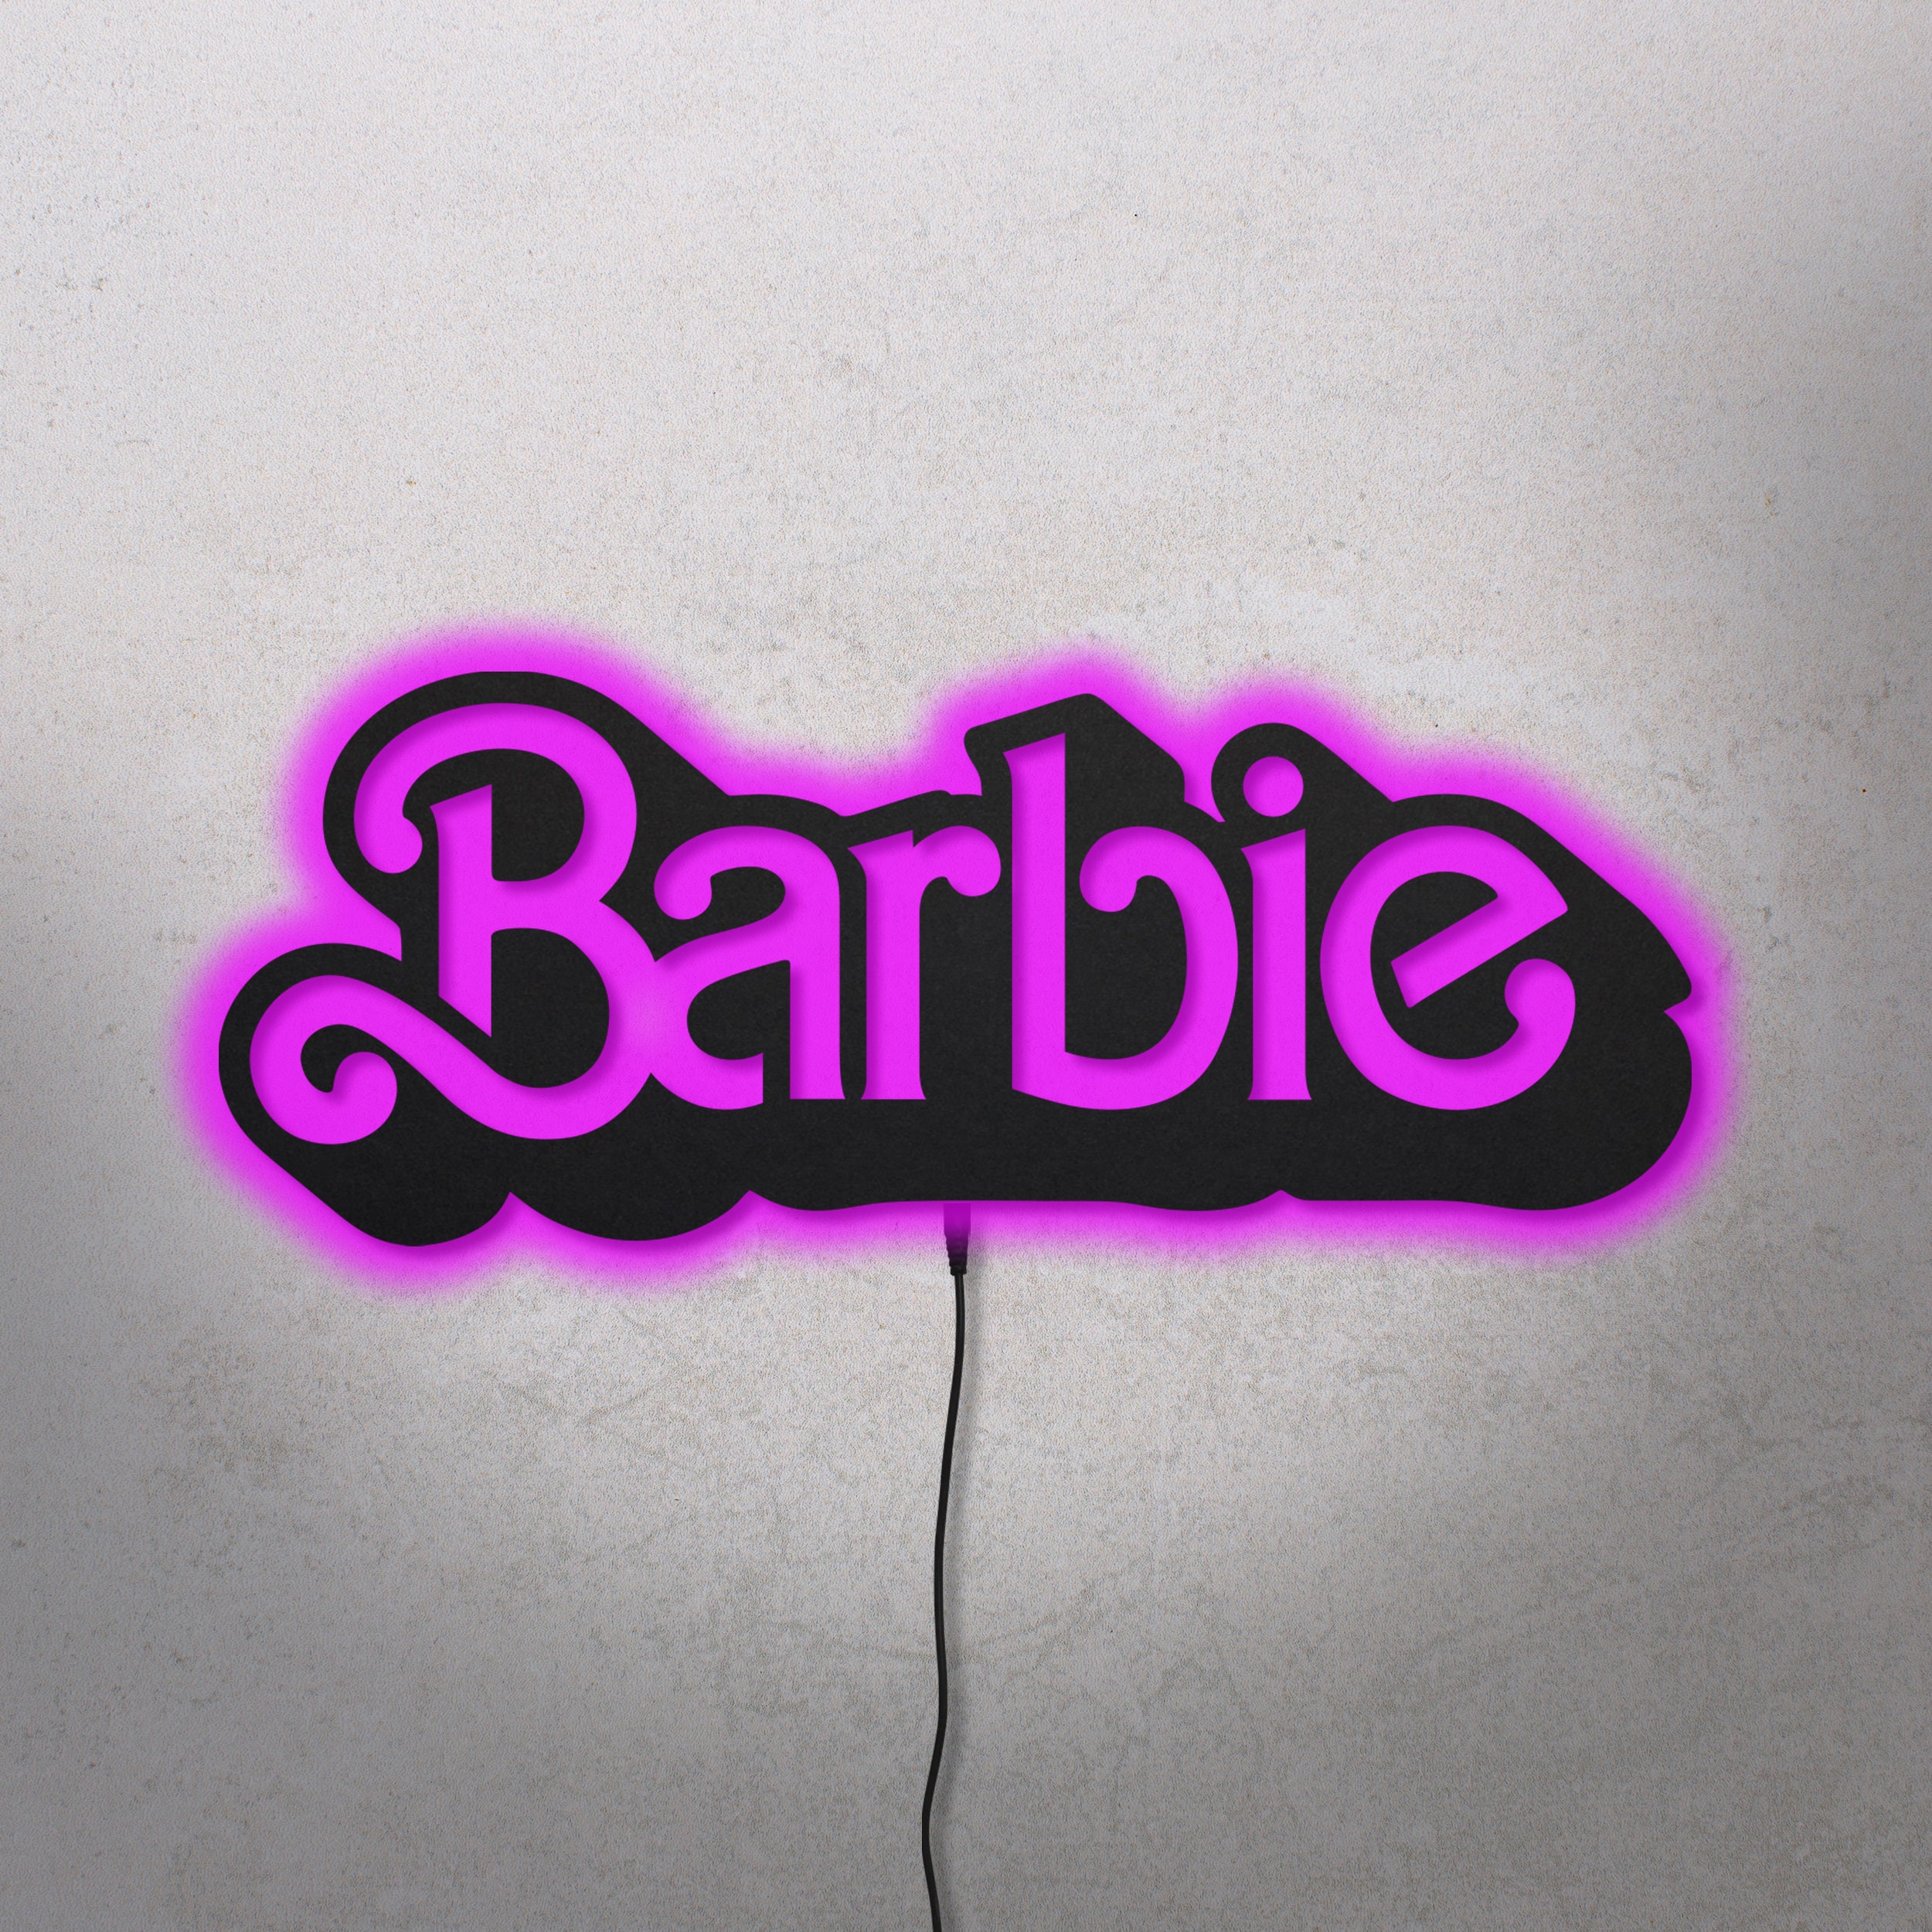 Barbie Wall Decor With Pink Led Light Unique Barbie Wall Decor For Kids Barbie Led Neon Light Wall Decor Gifts Gift For Barbie Lovers PT54133